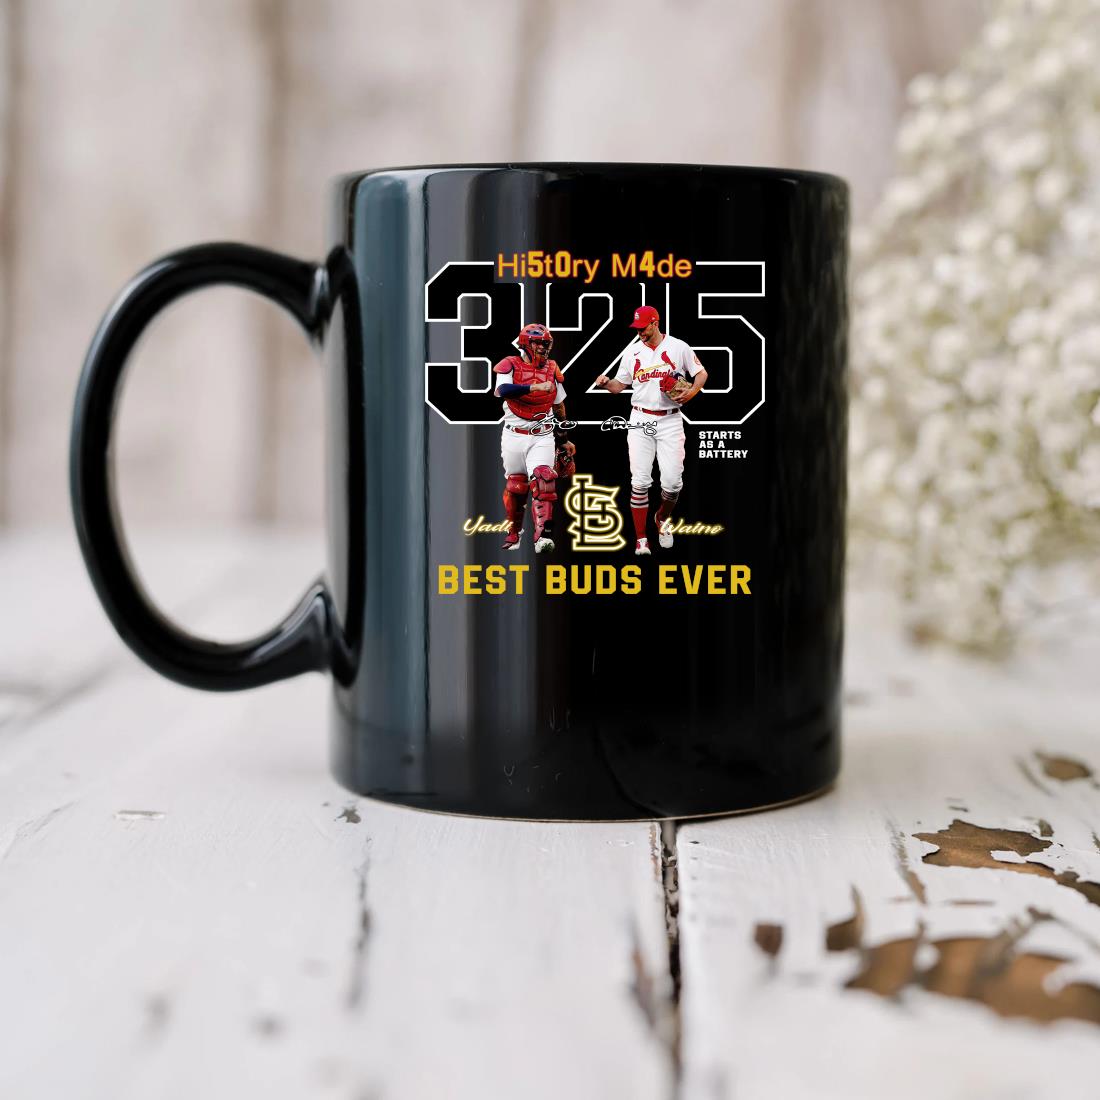 Official St Louis Cardinals History Mode 325 Best Beds Ever Yadi And Waino Signatures Mug